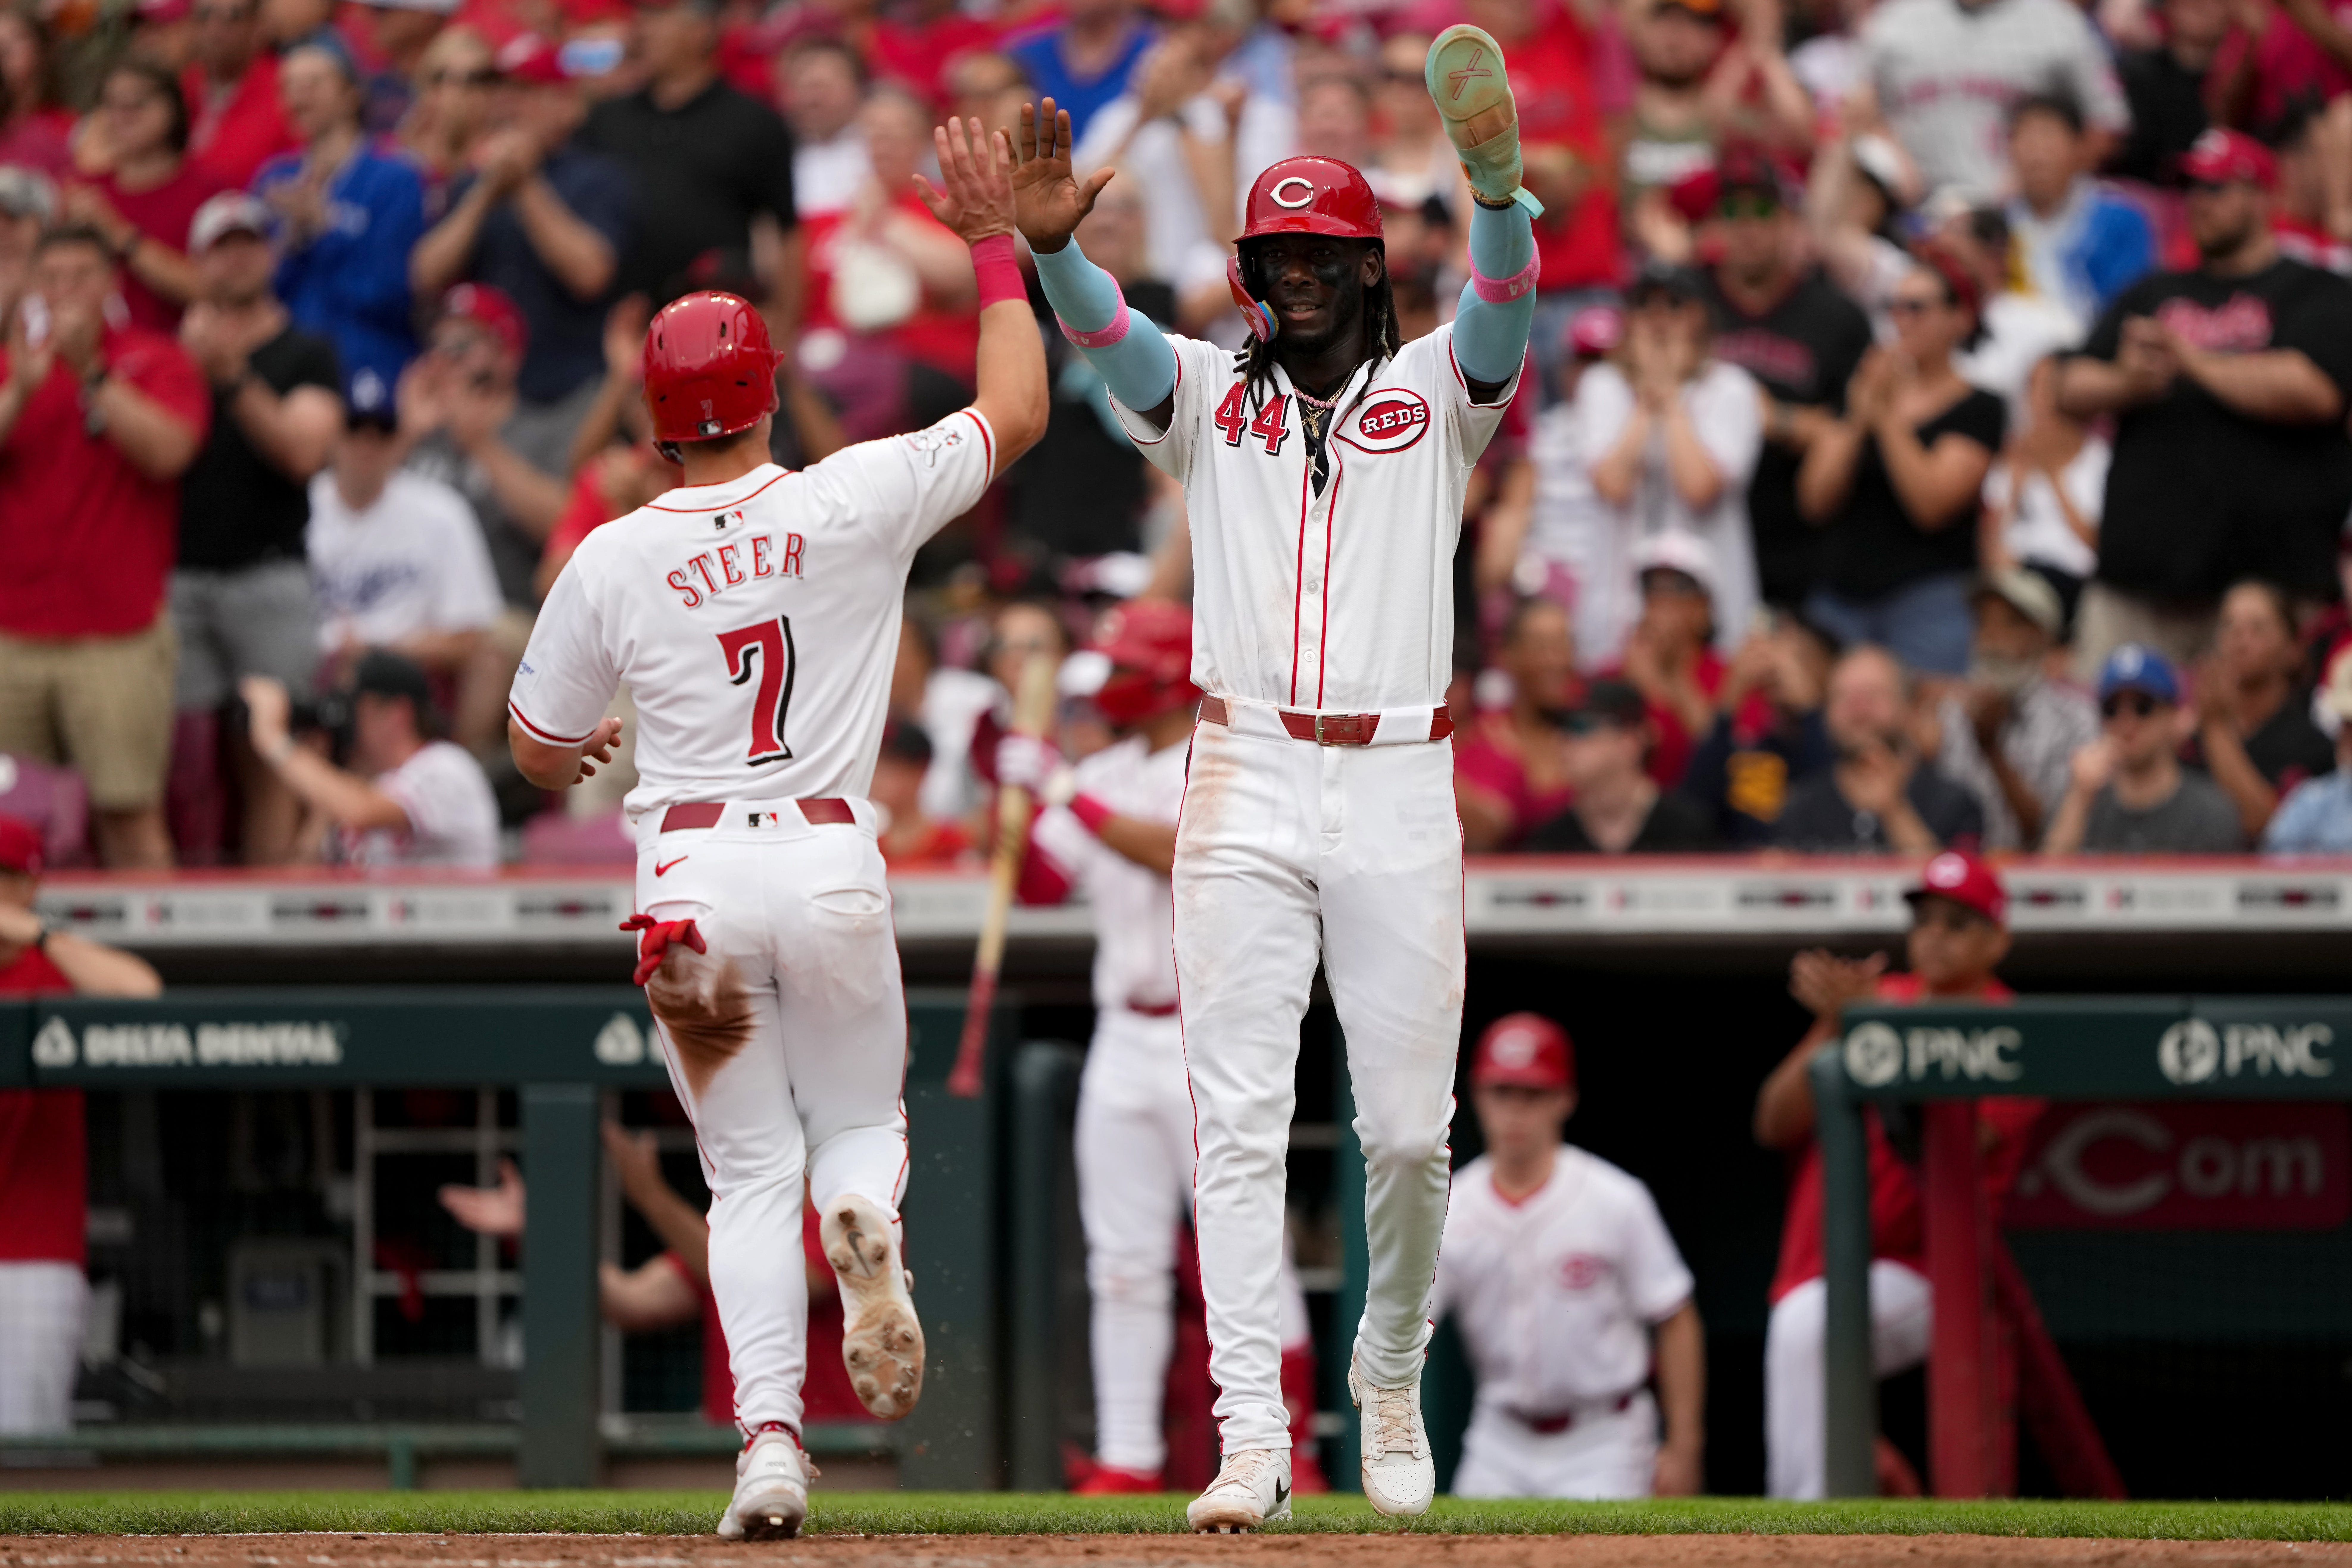 Reds look to build on sweep of Dodgers against Cardinals Monday